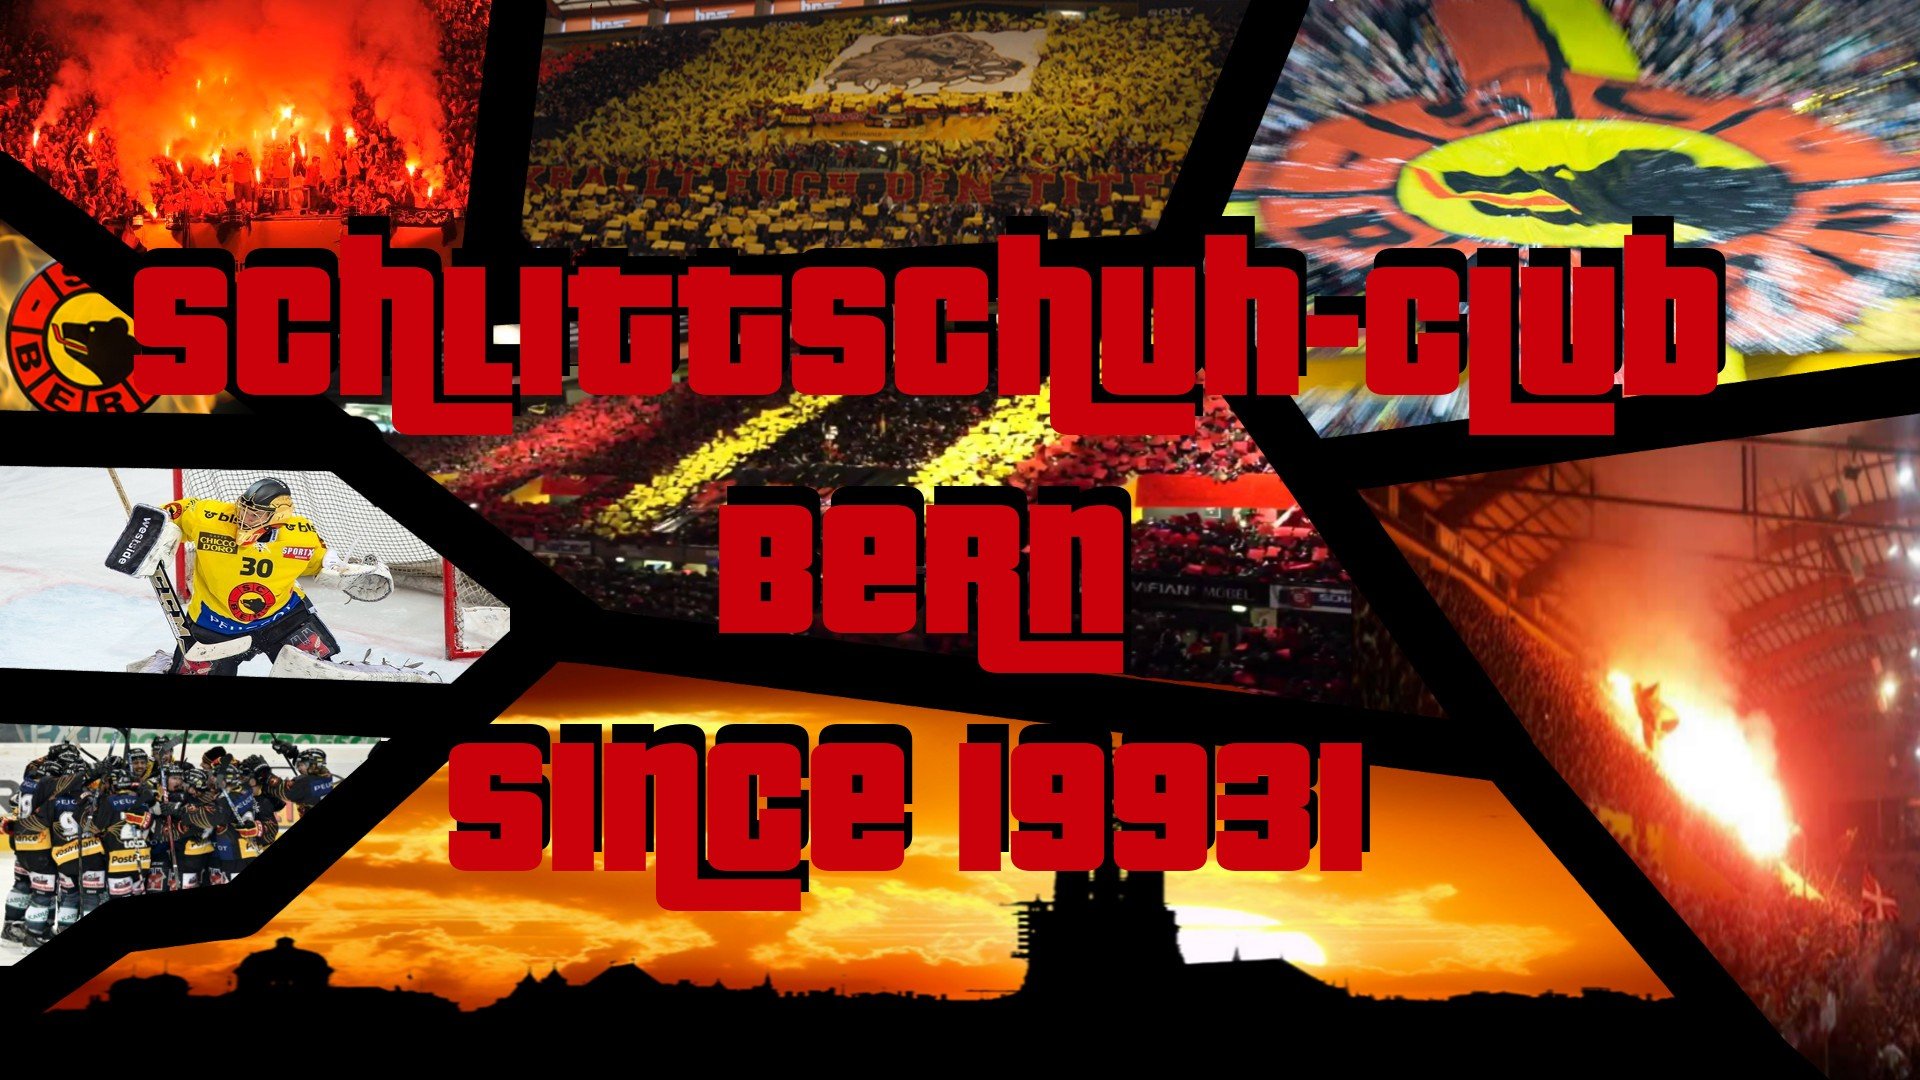 ice hockey, Bern, 1931, SC Bern, Collage, Fire, Sports, Sunset, Red, Arena Wallpaper